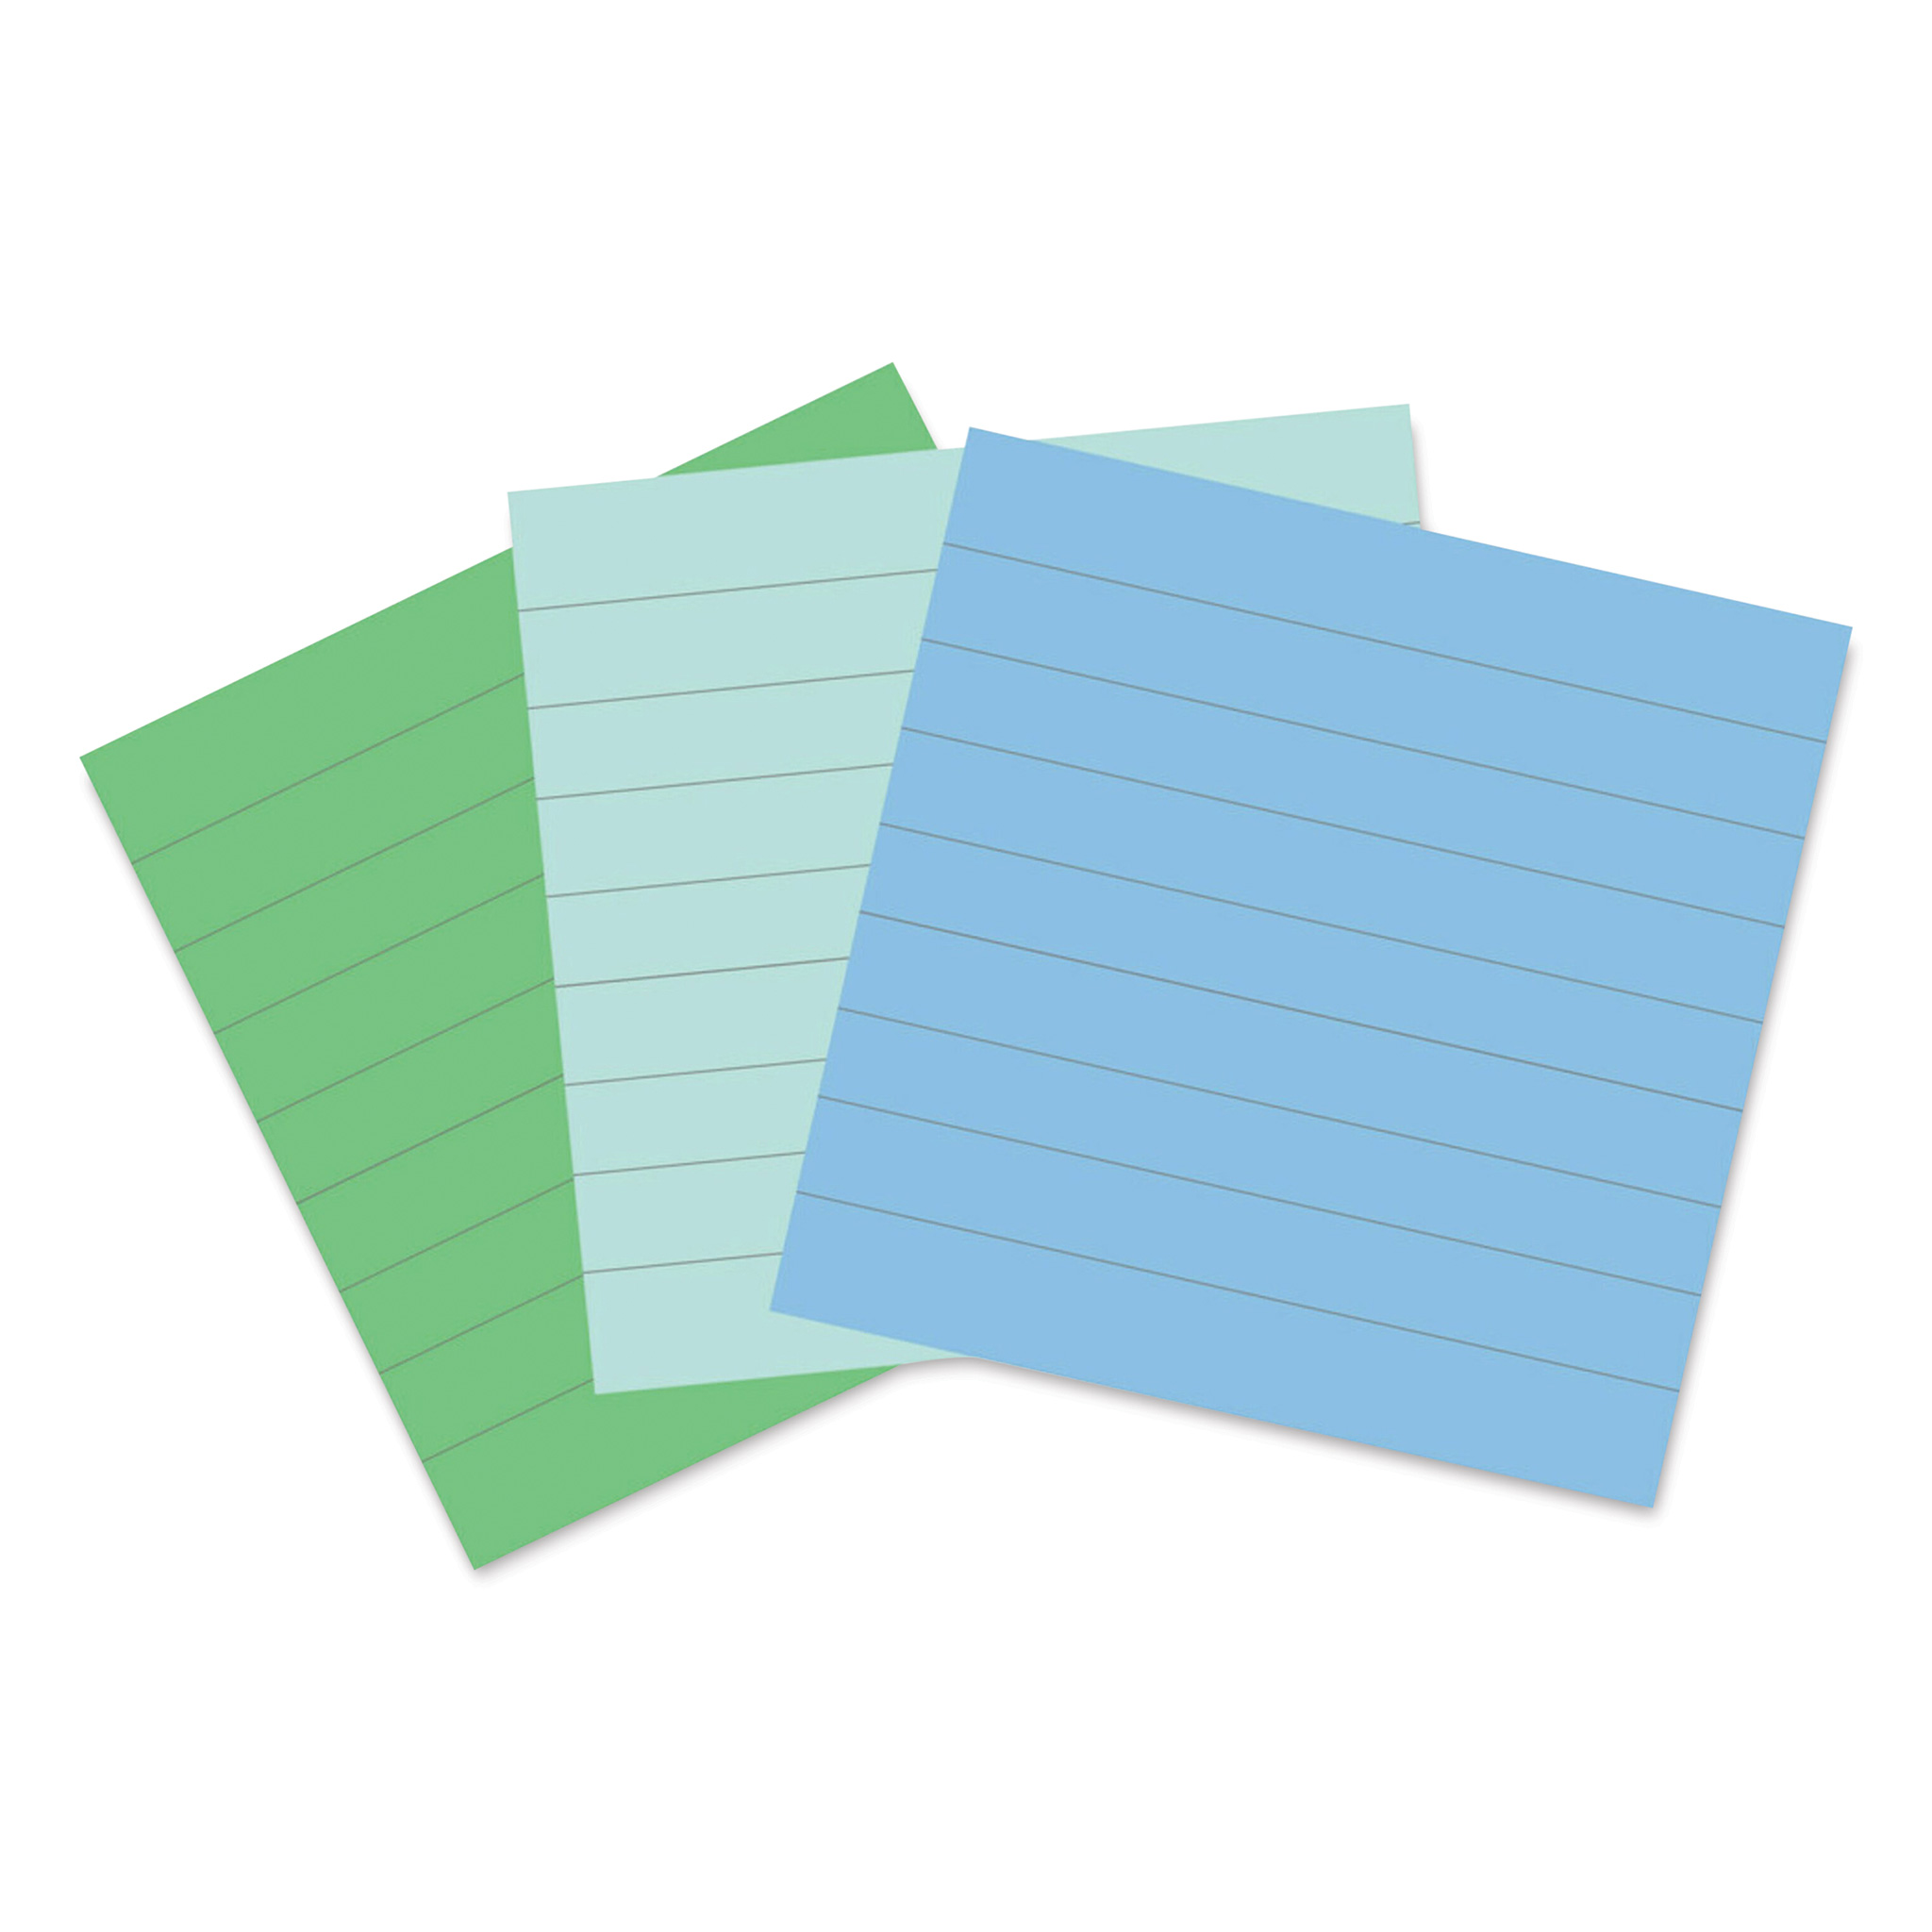 Post-it Super Sticky Notes - 4 x 4, World of Color Collection, Lined, Pkg  of 3, BLICK Art Materials